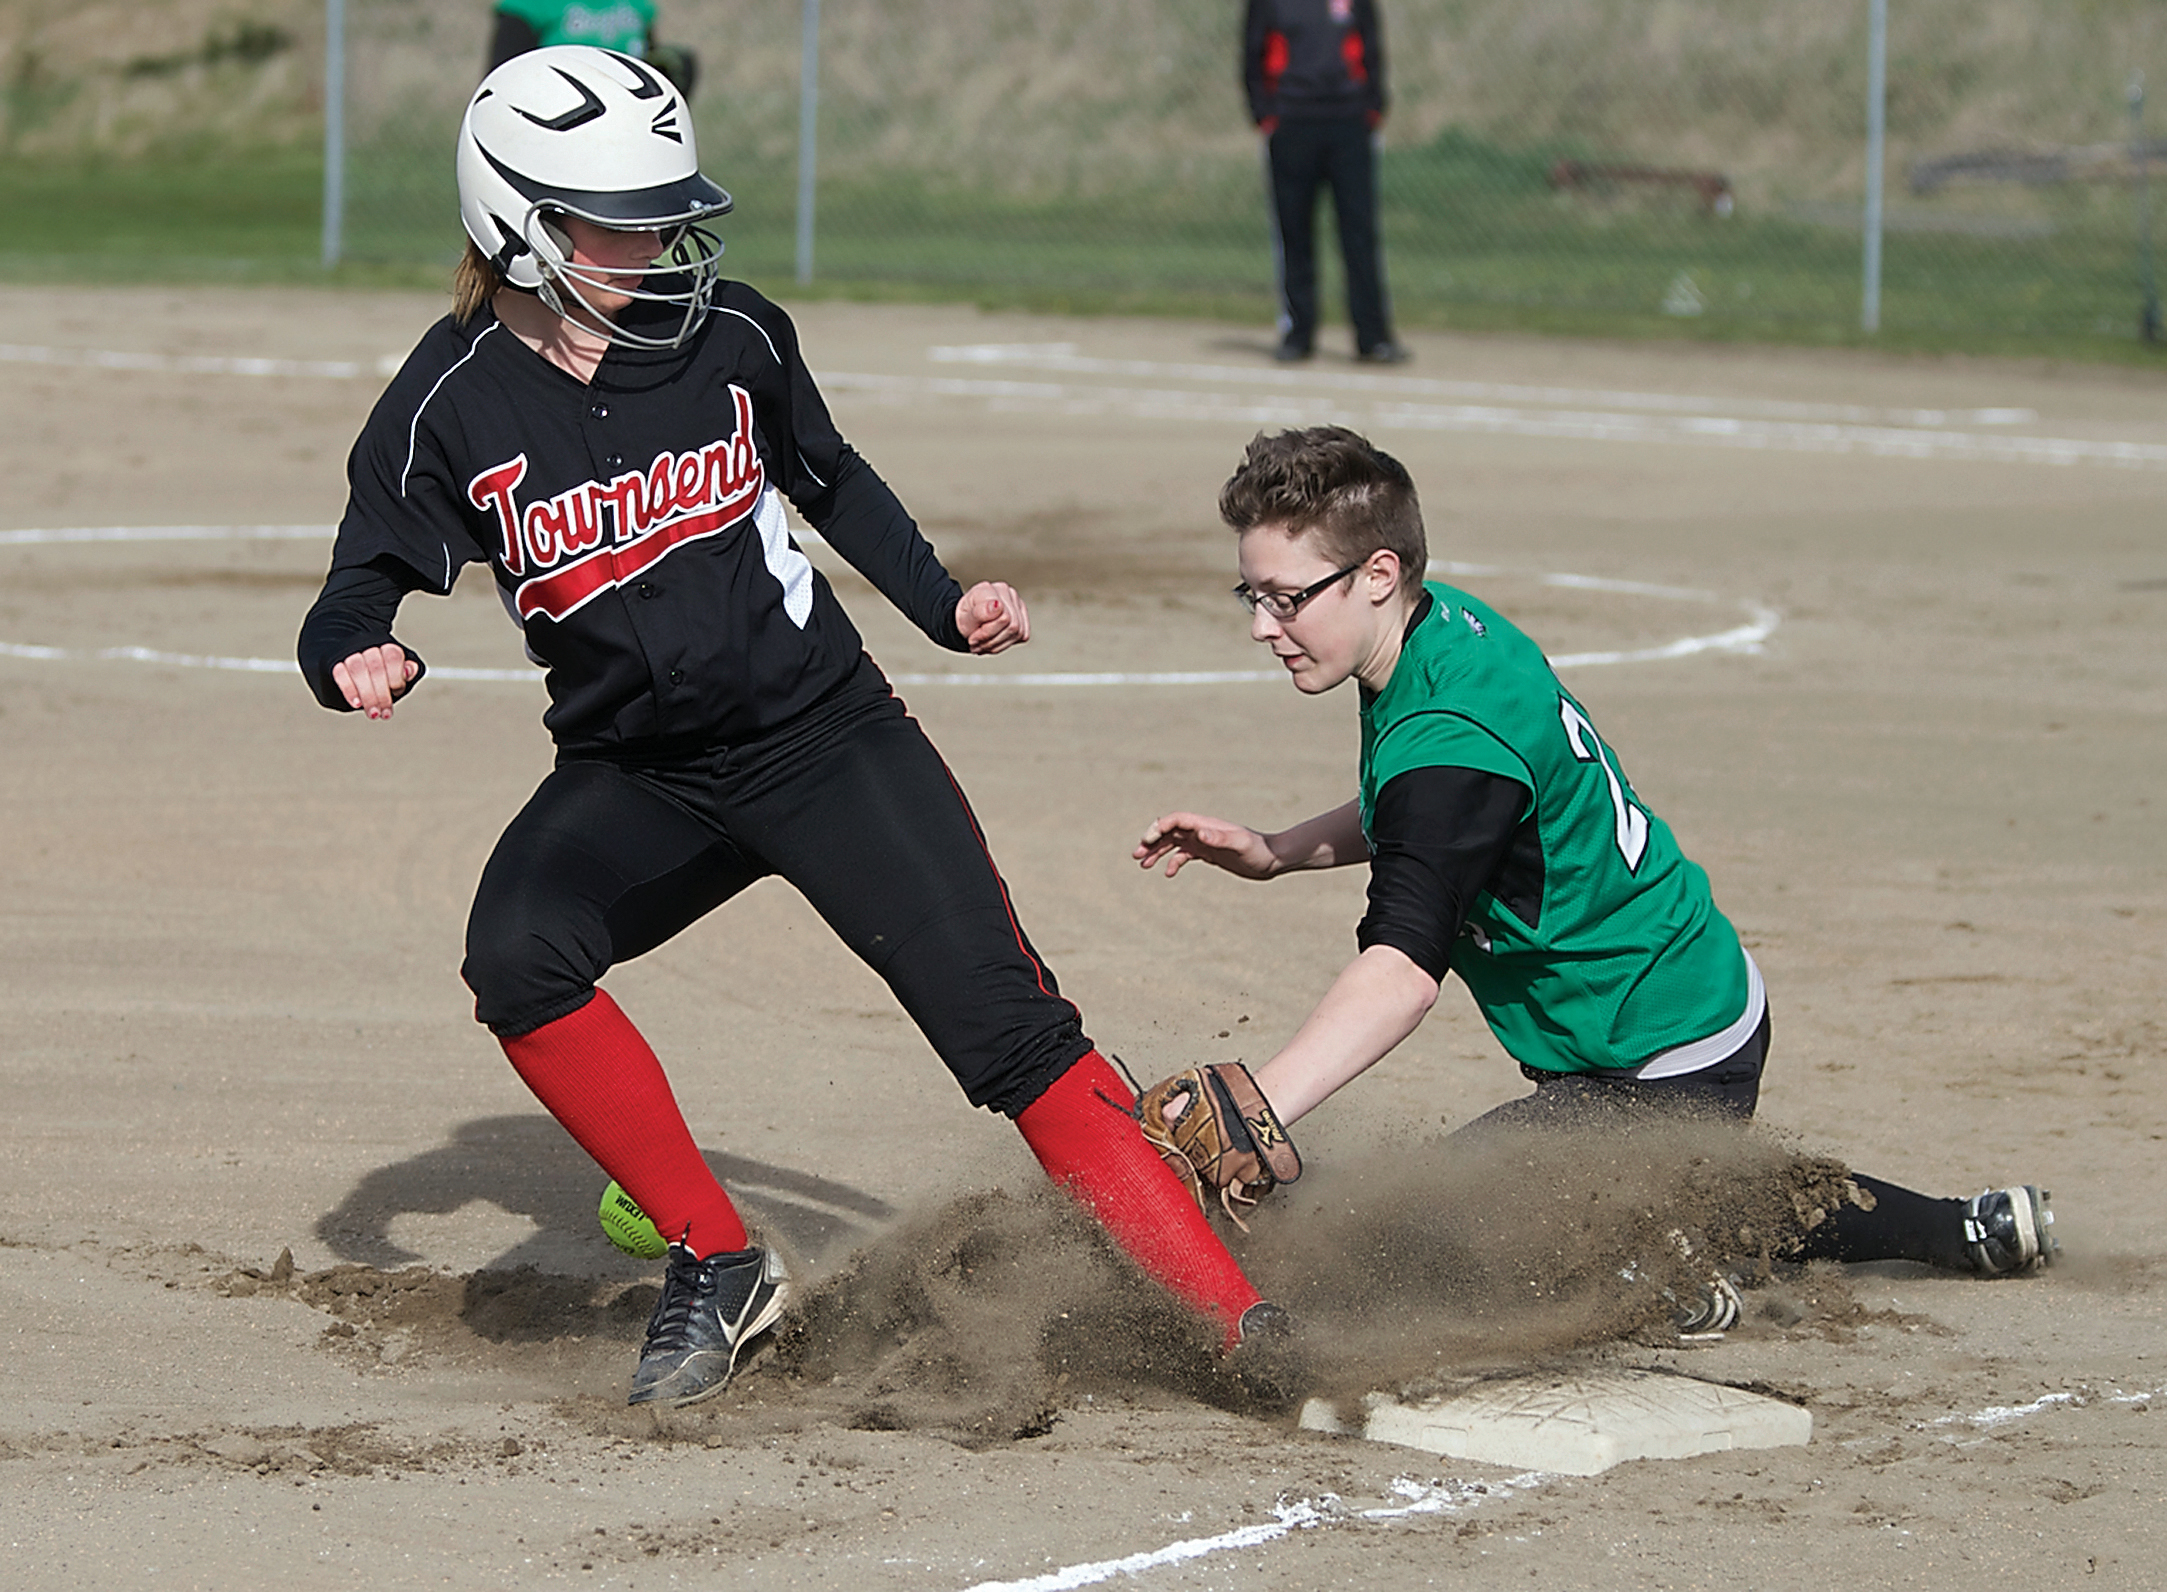 Port Townsend's Gen Polizzi does a stand-up slide into third as Klahowya's Amanda Shultz loses the ball. Steve Mullensky/for Peninsula Daily News